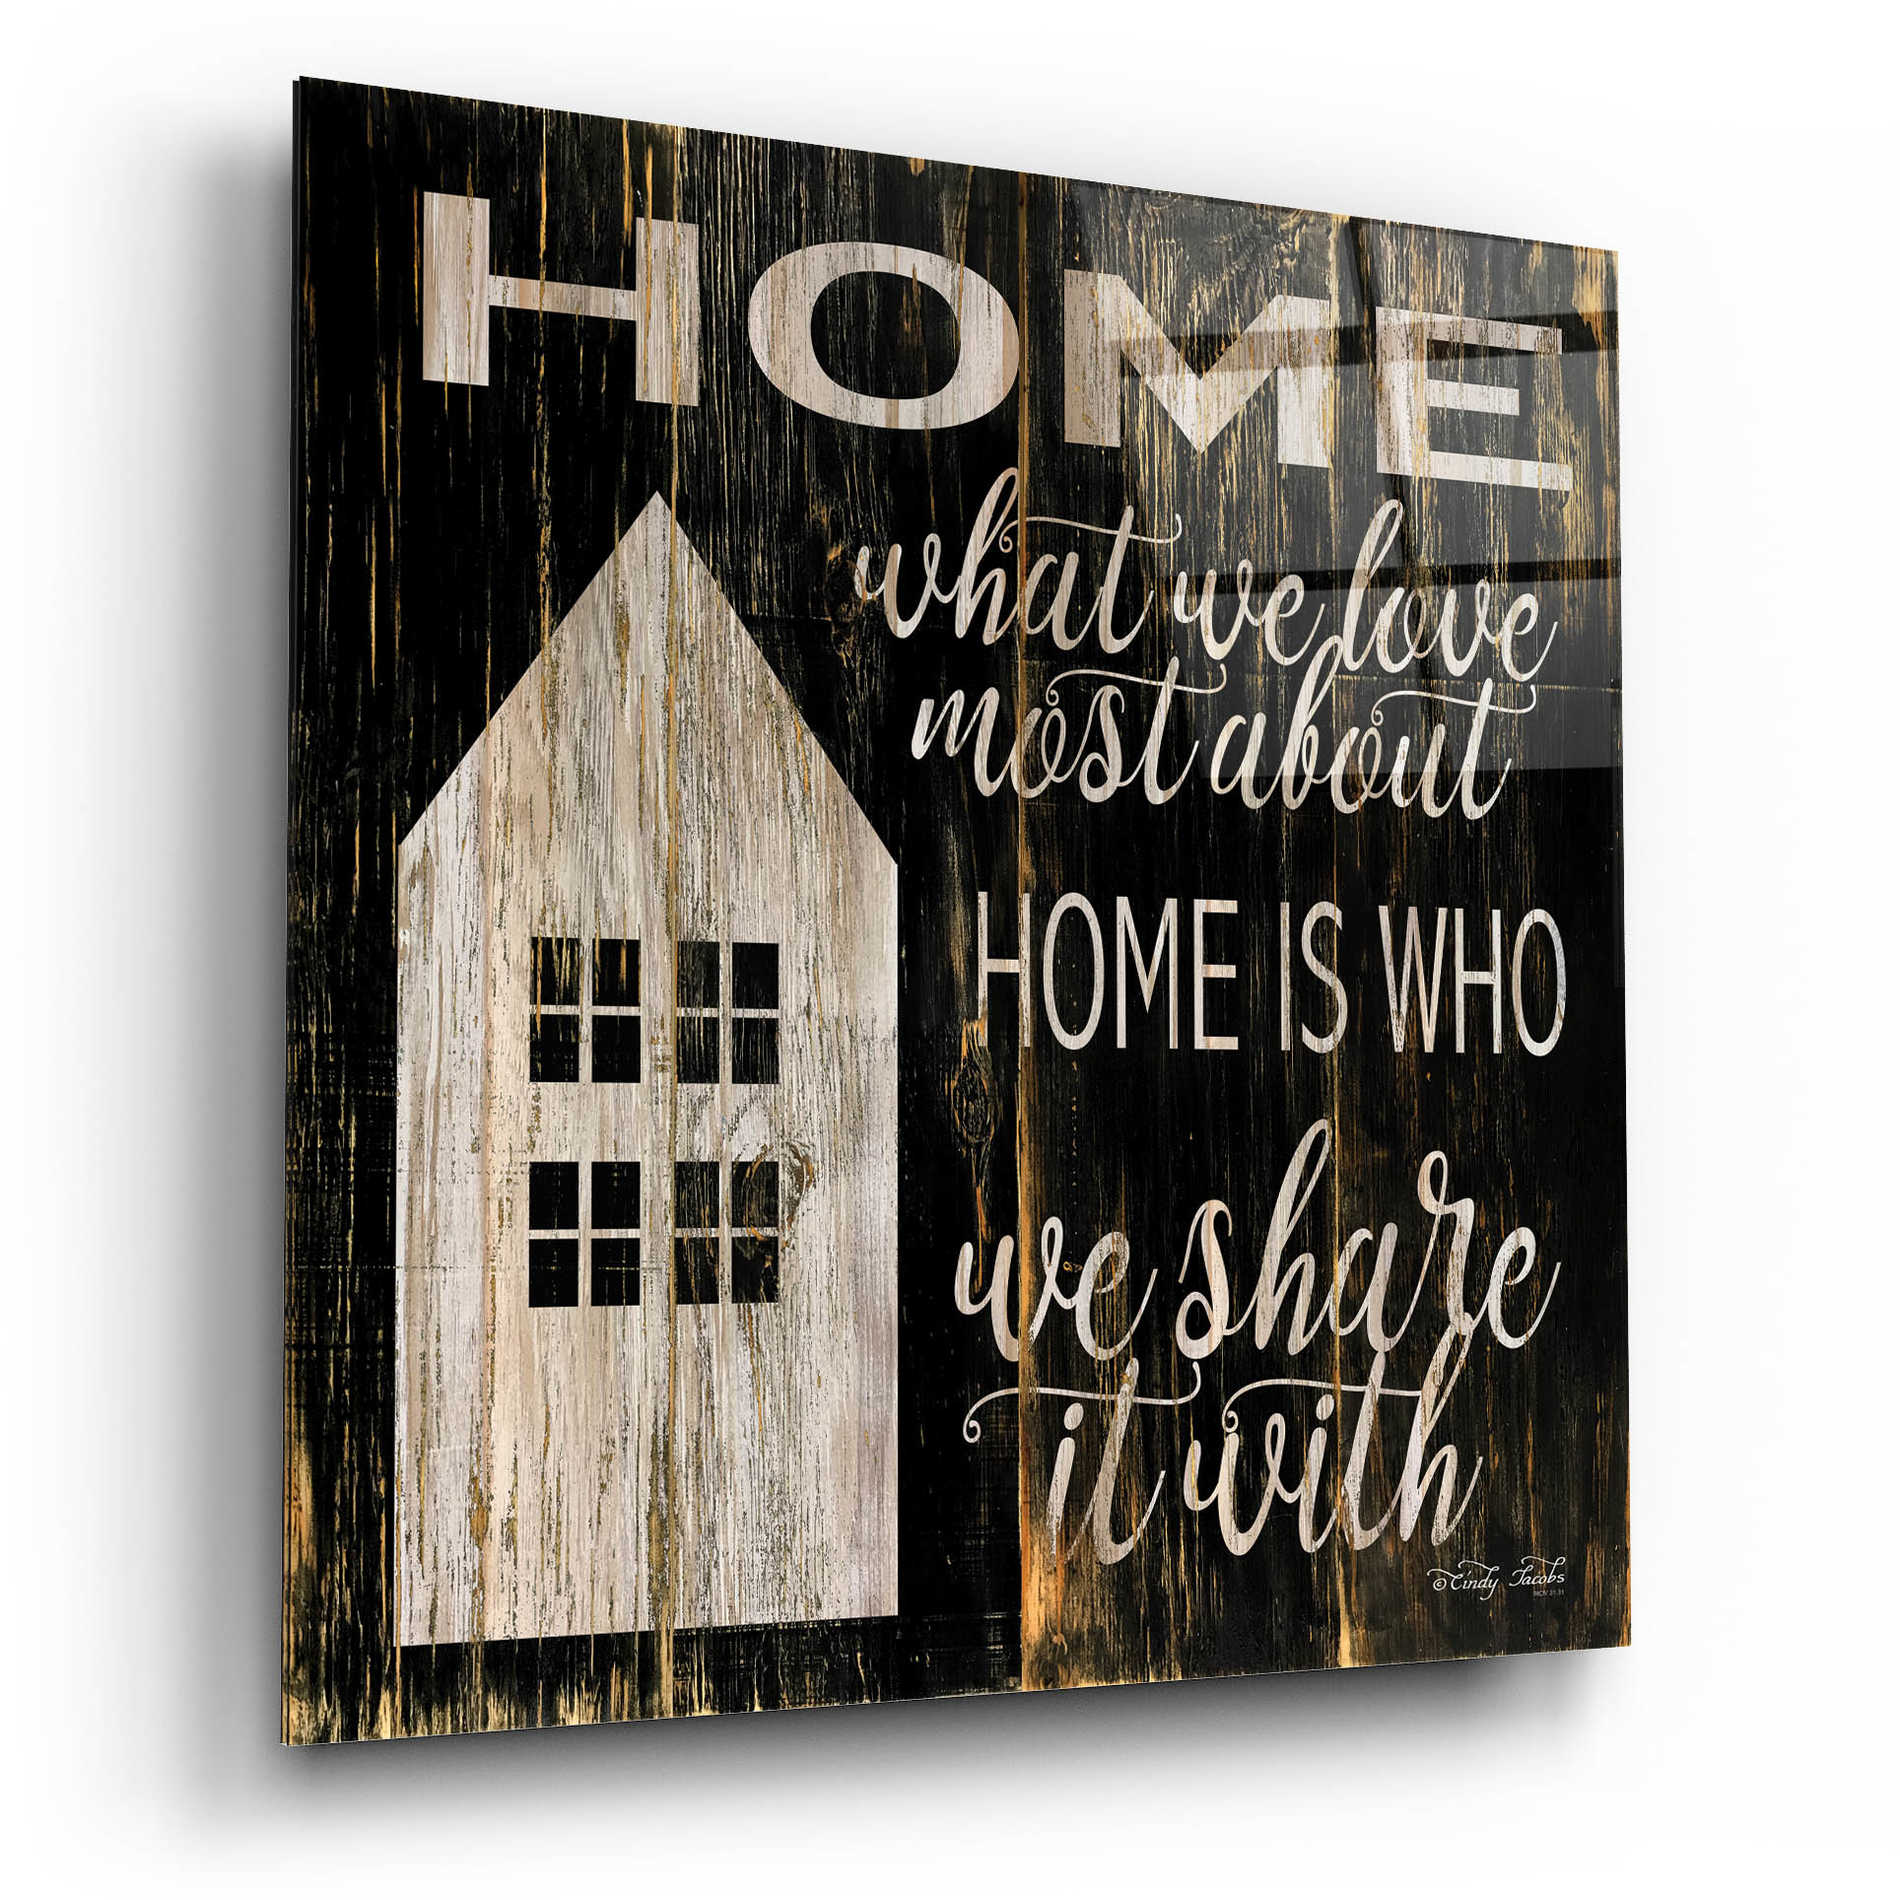 Epic Art 'Home is Who We Share It With' by Cindy Jacobs, Acrylic Glass Wall Art,12x12